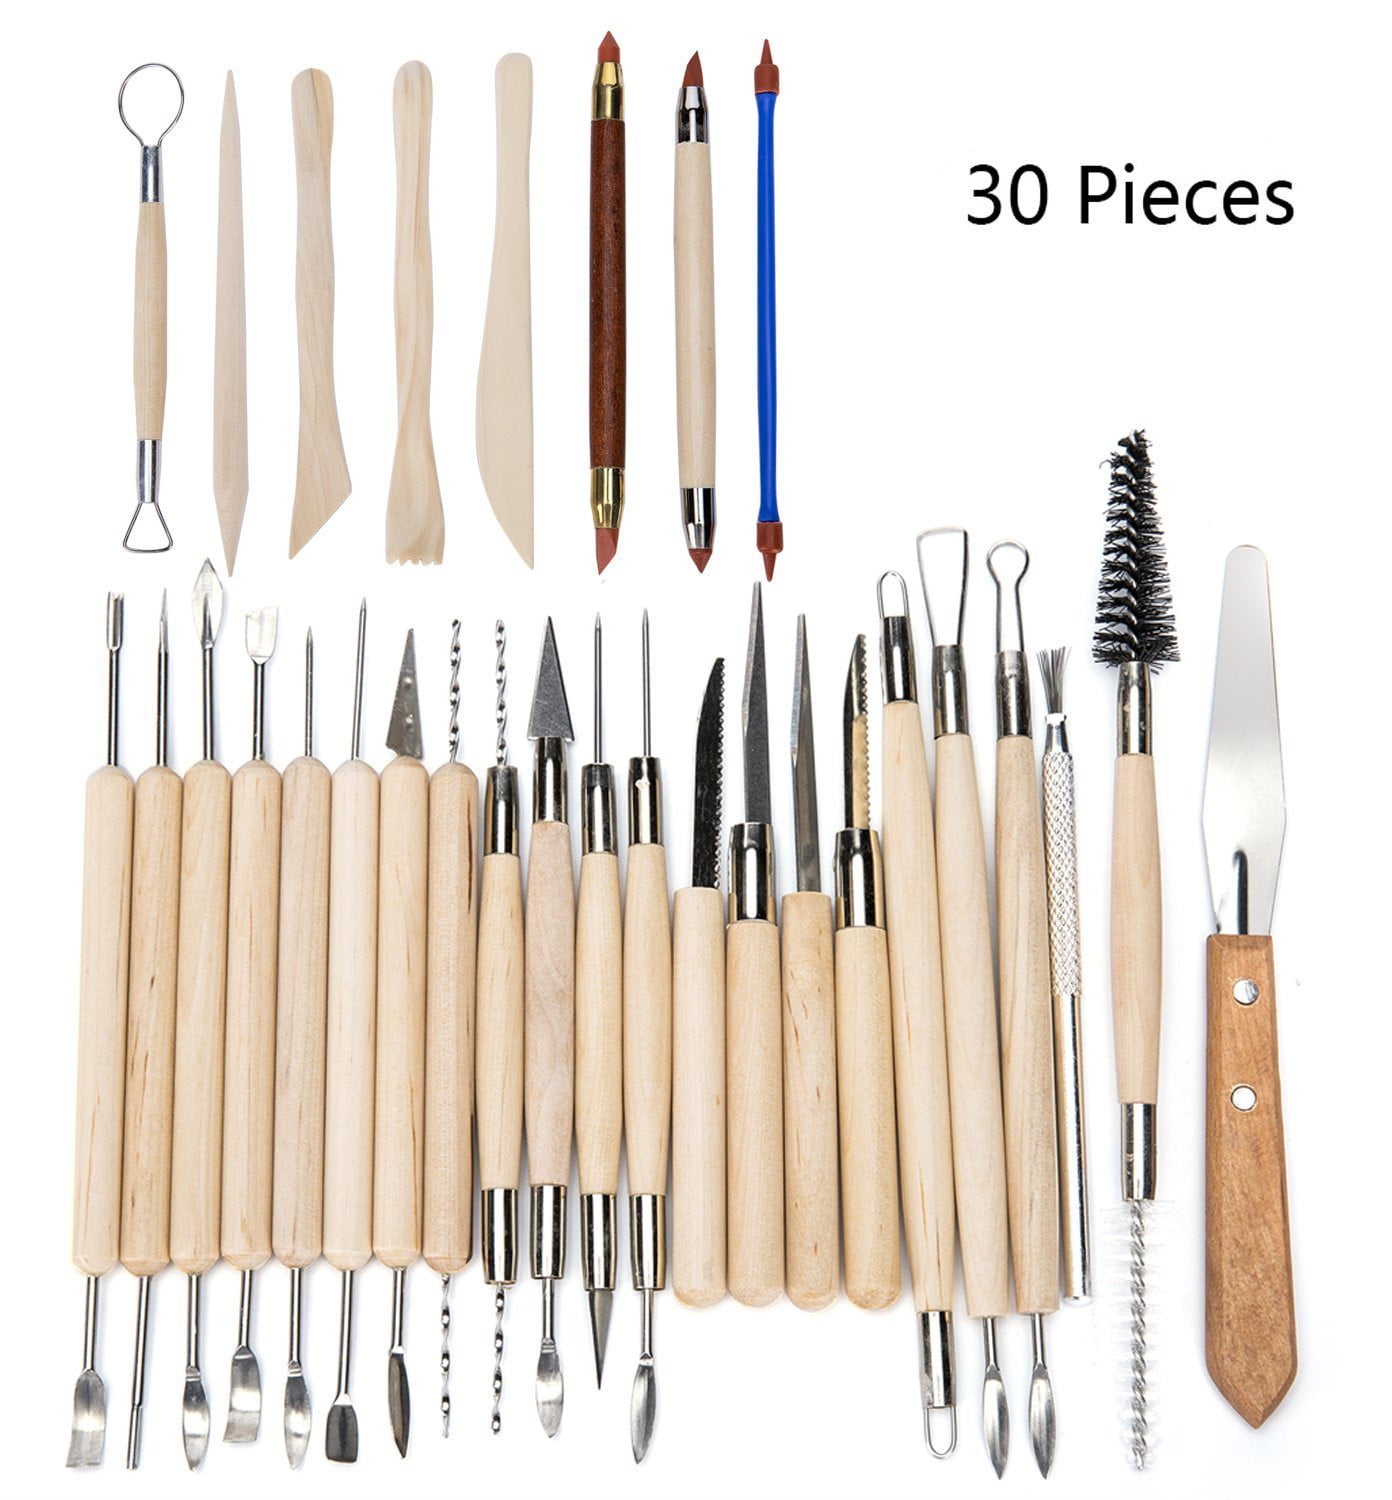 10pcs Clay Sculpting Set Wax Carving Pottery Tools Shapers Polymer n Modeli H1A4 